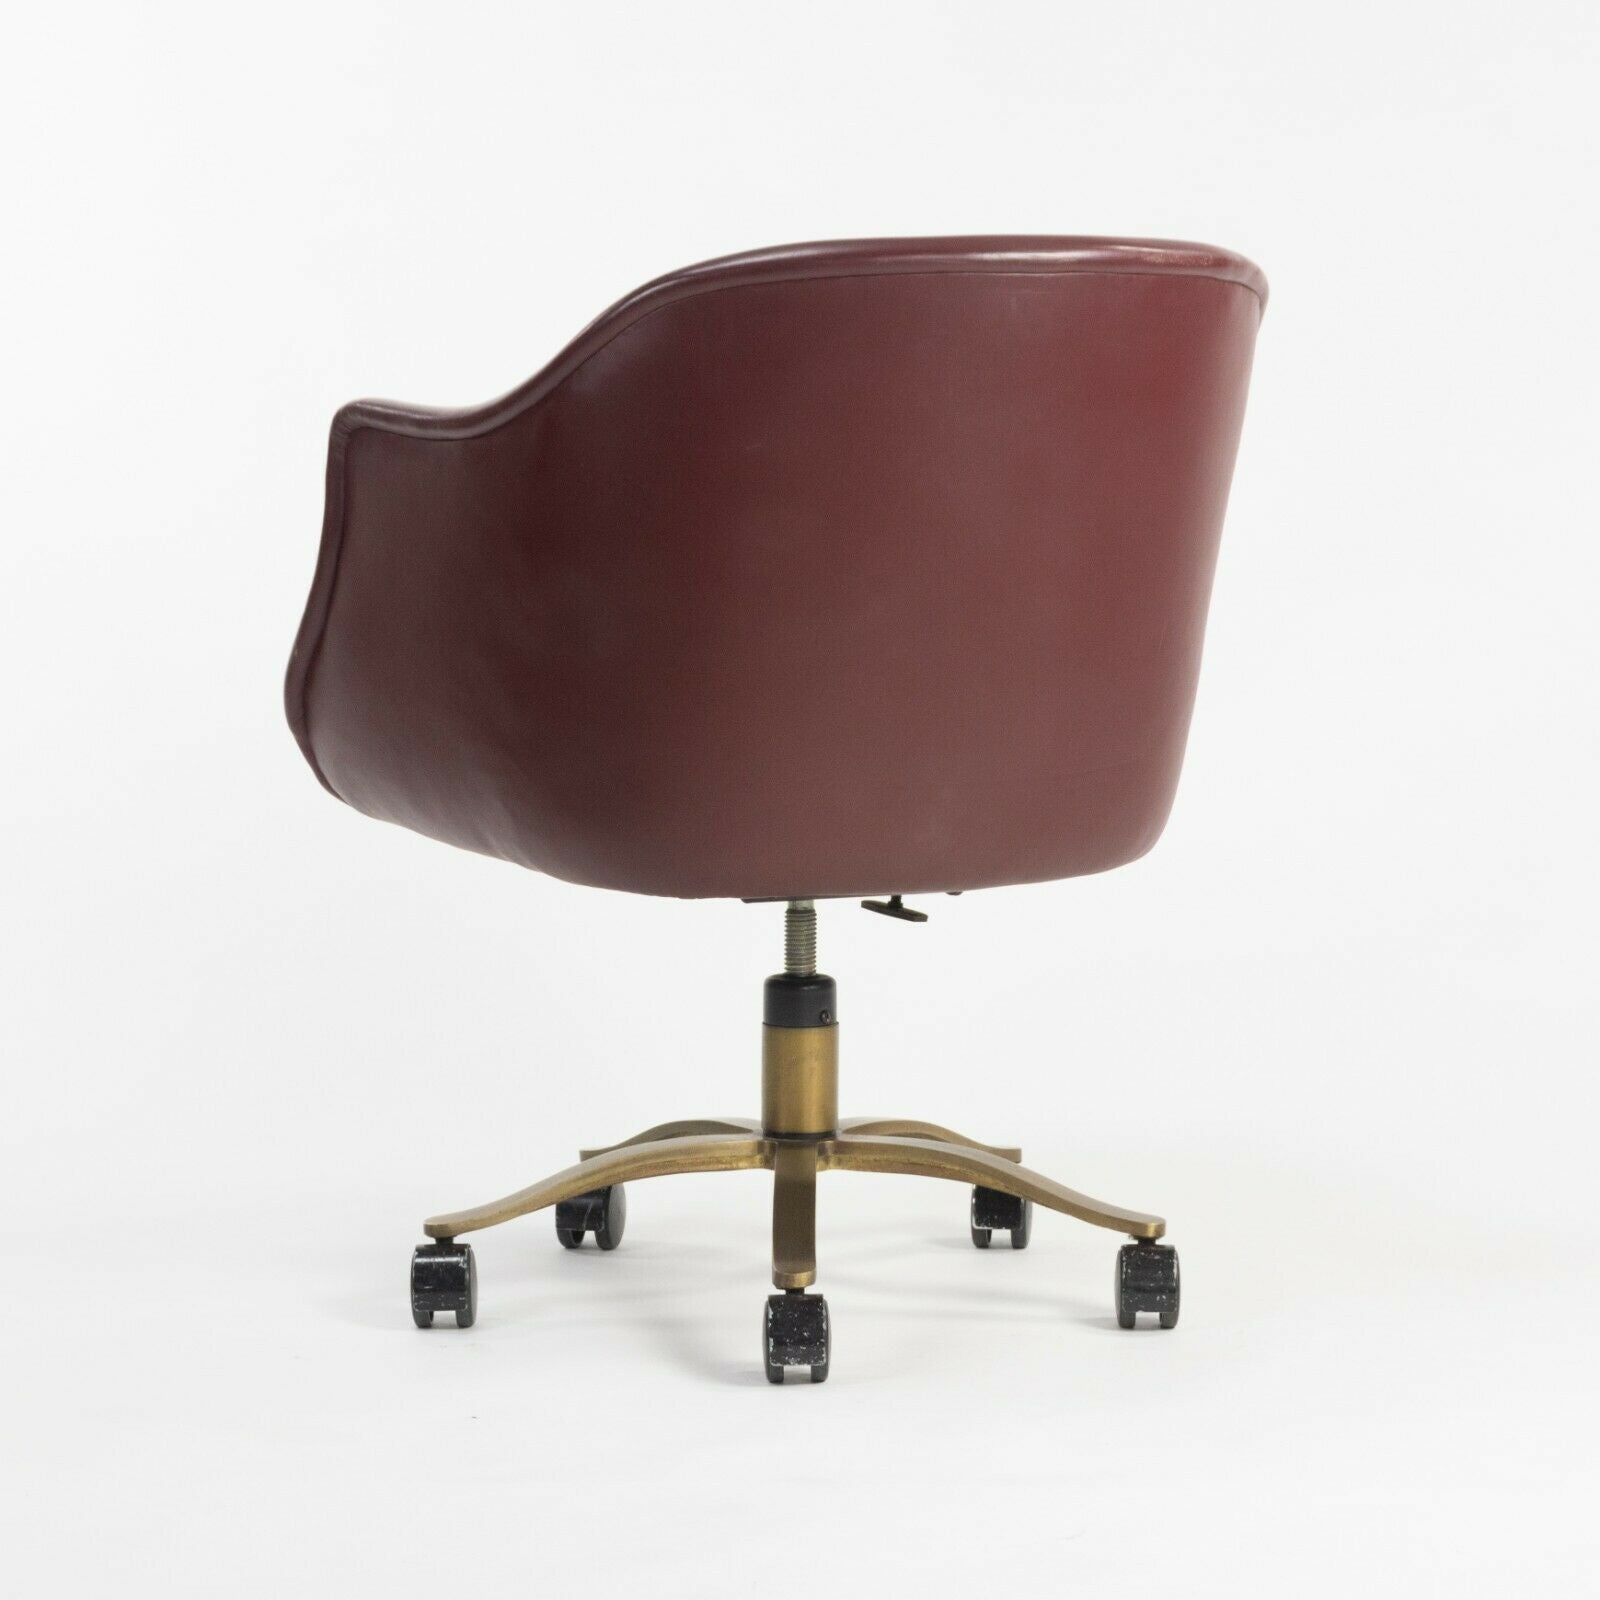 Nicos Zographos Alpha Bucket Desk Chairs with Bronze Base Cordovan Leather 6x